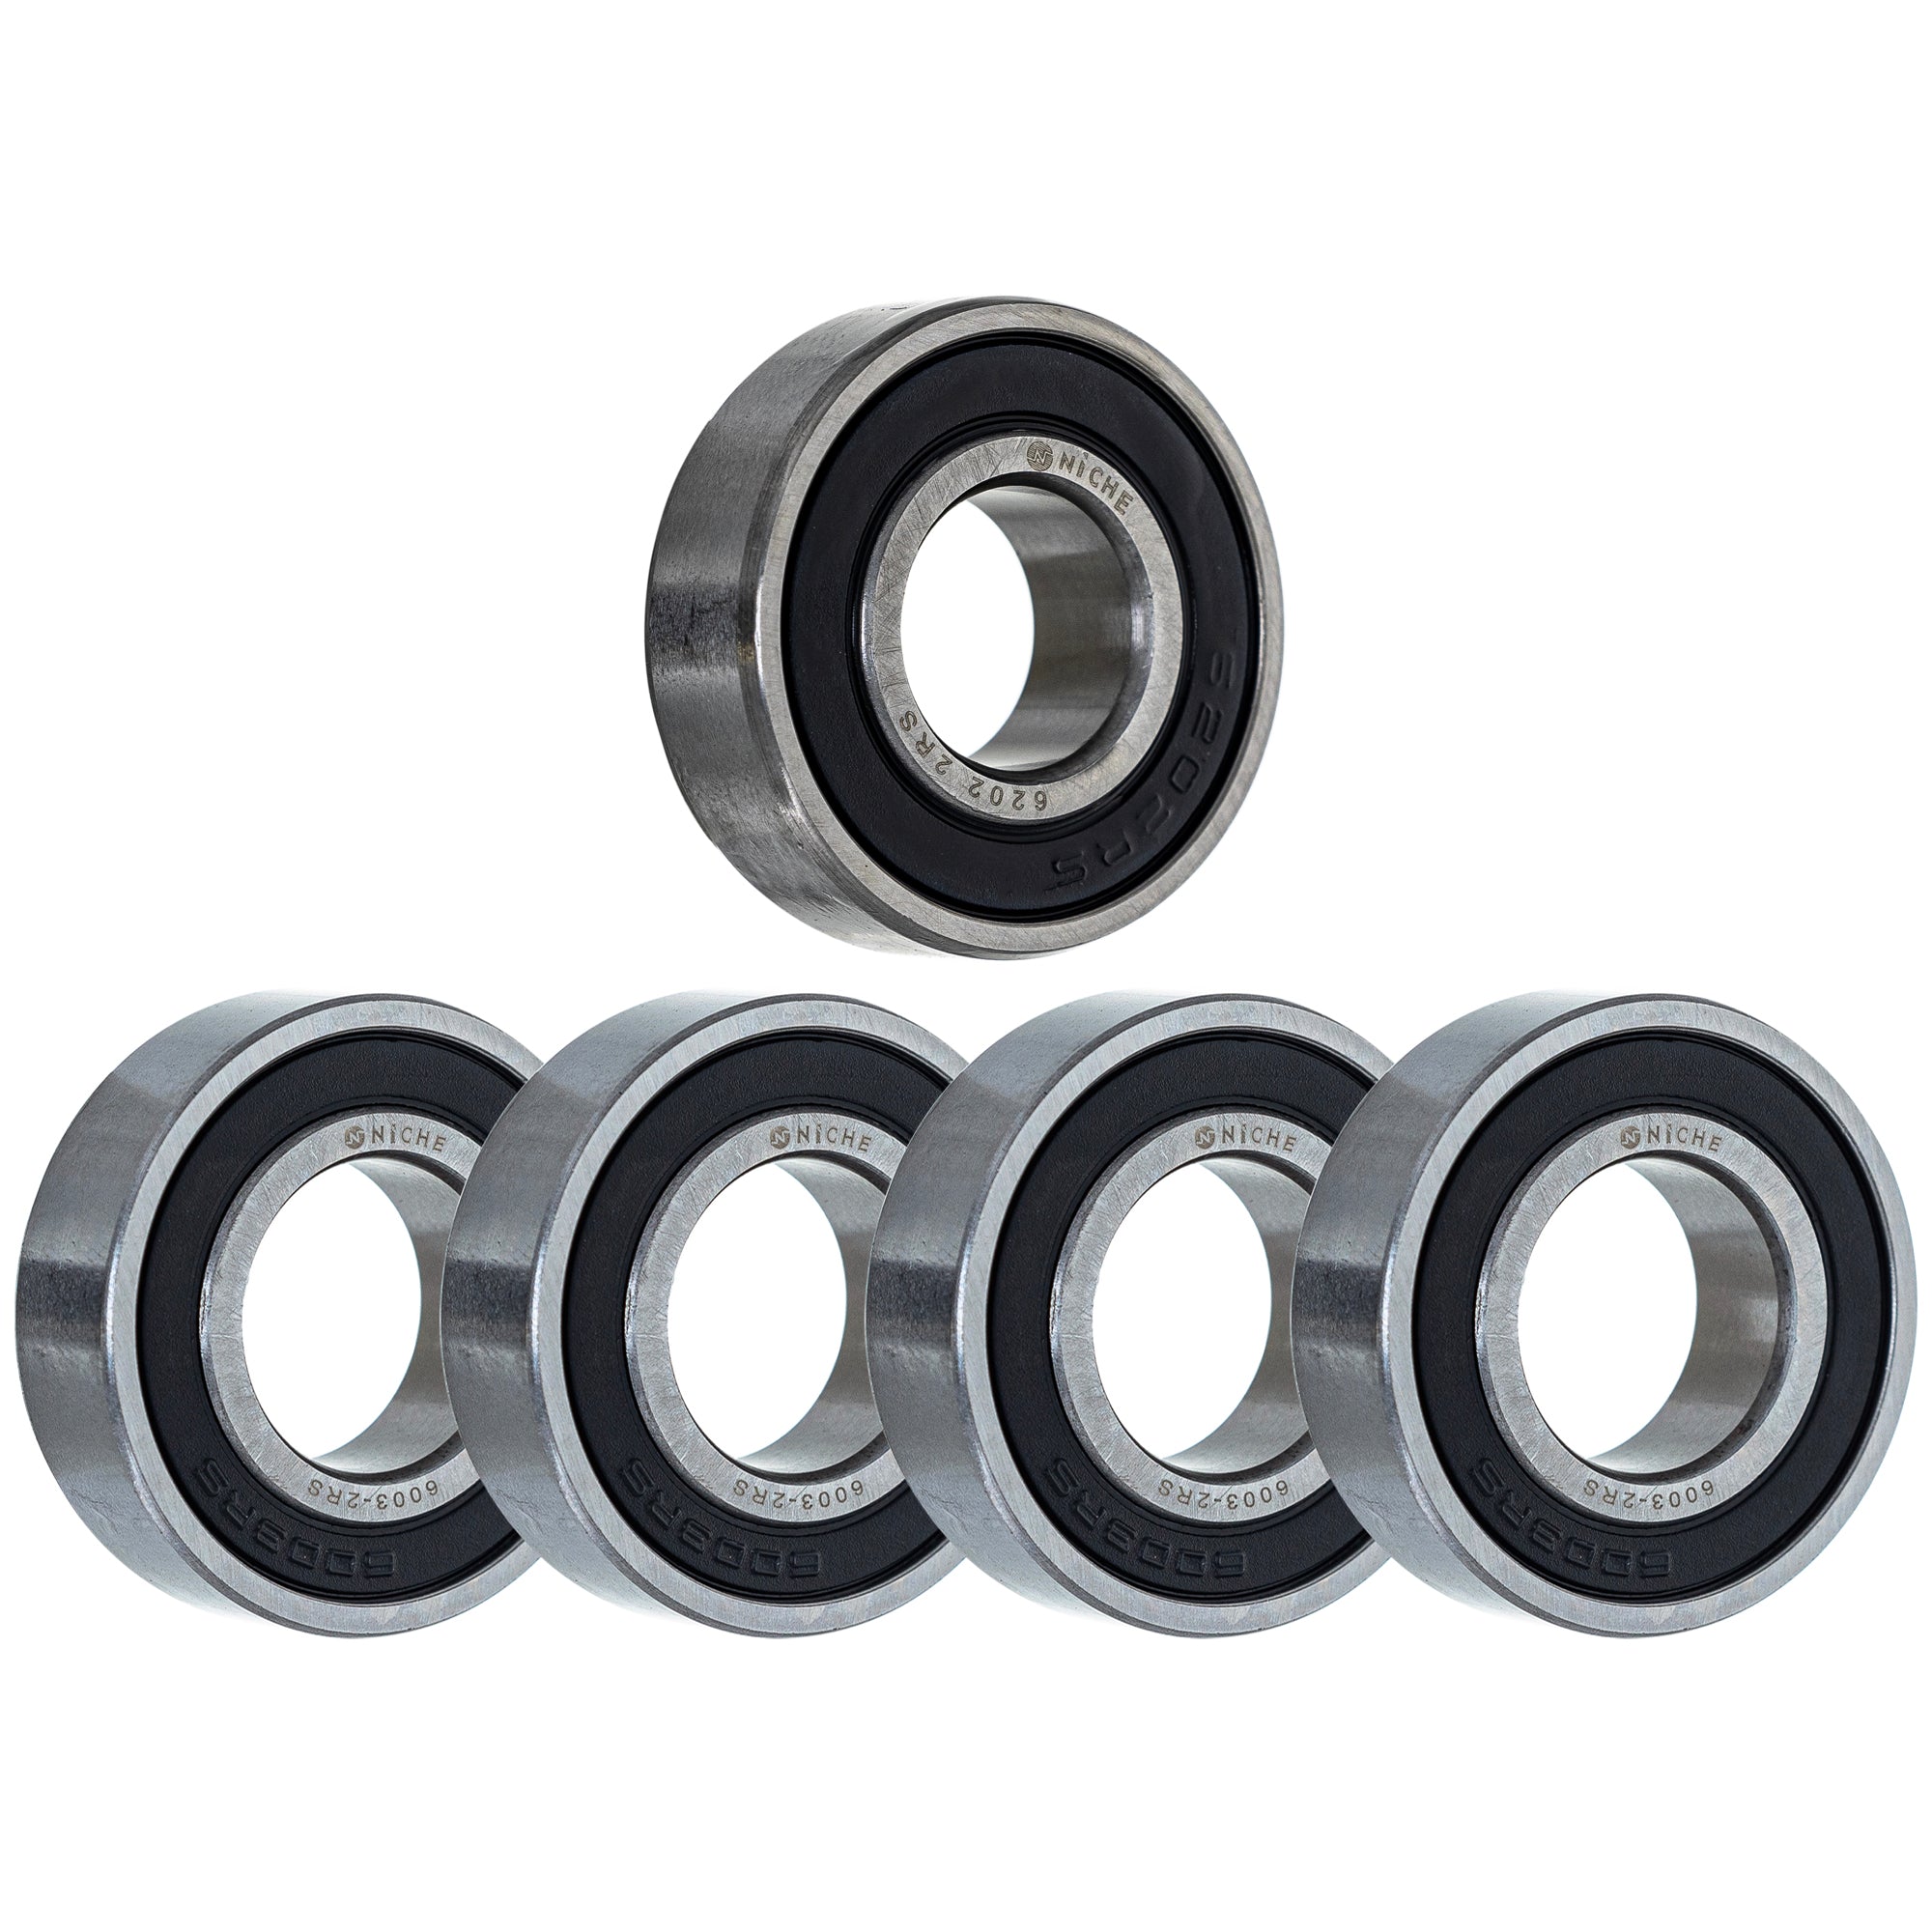 Wheel Bearing Kit for zOTHER Ref No TC50 SX-E EE 50 NICHE MK1008783